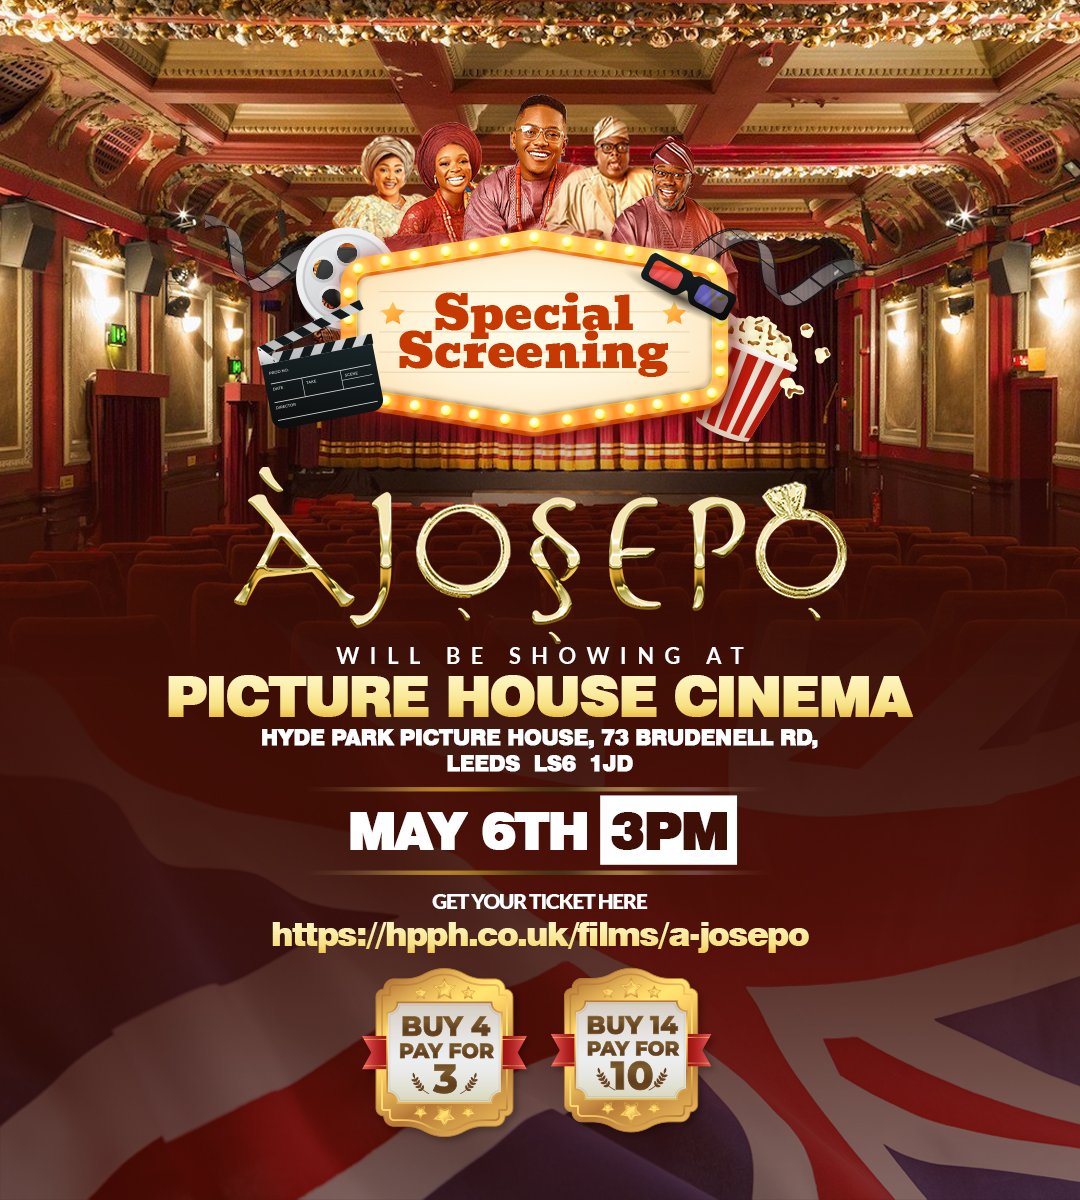 Special Bank Holiday show: AJOSEPO showing in @HydeParkPH Leeds on 6th May. Tickets are available online 🇬🇧🇬🇧🔥🔥 #wizkidanddavido #Leeds #BayernRealMadrid #Nollywood #africanfilm